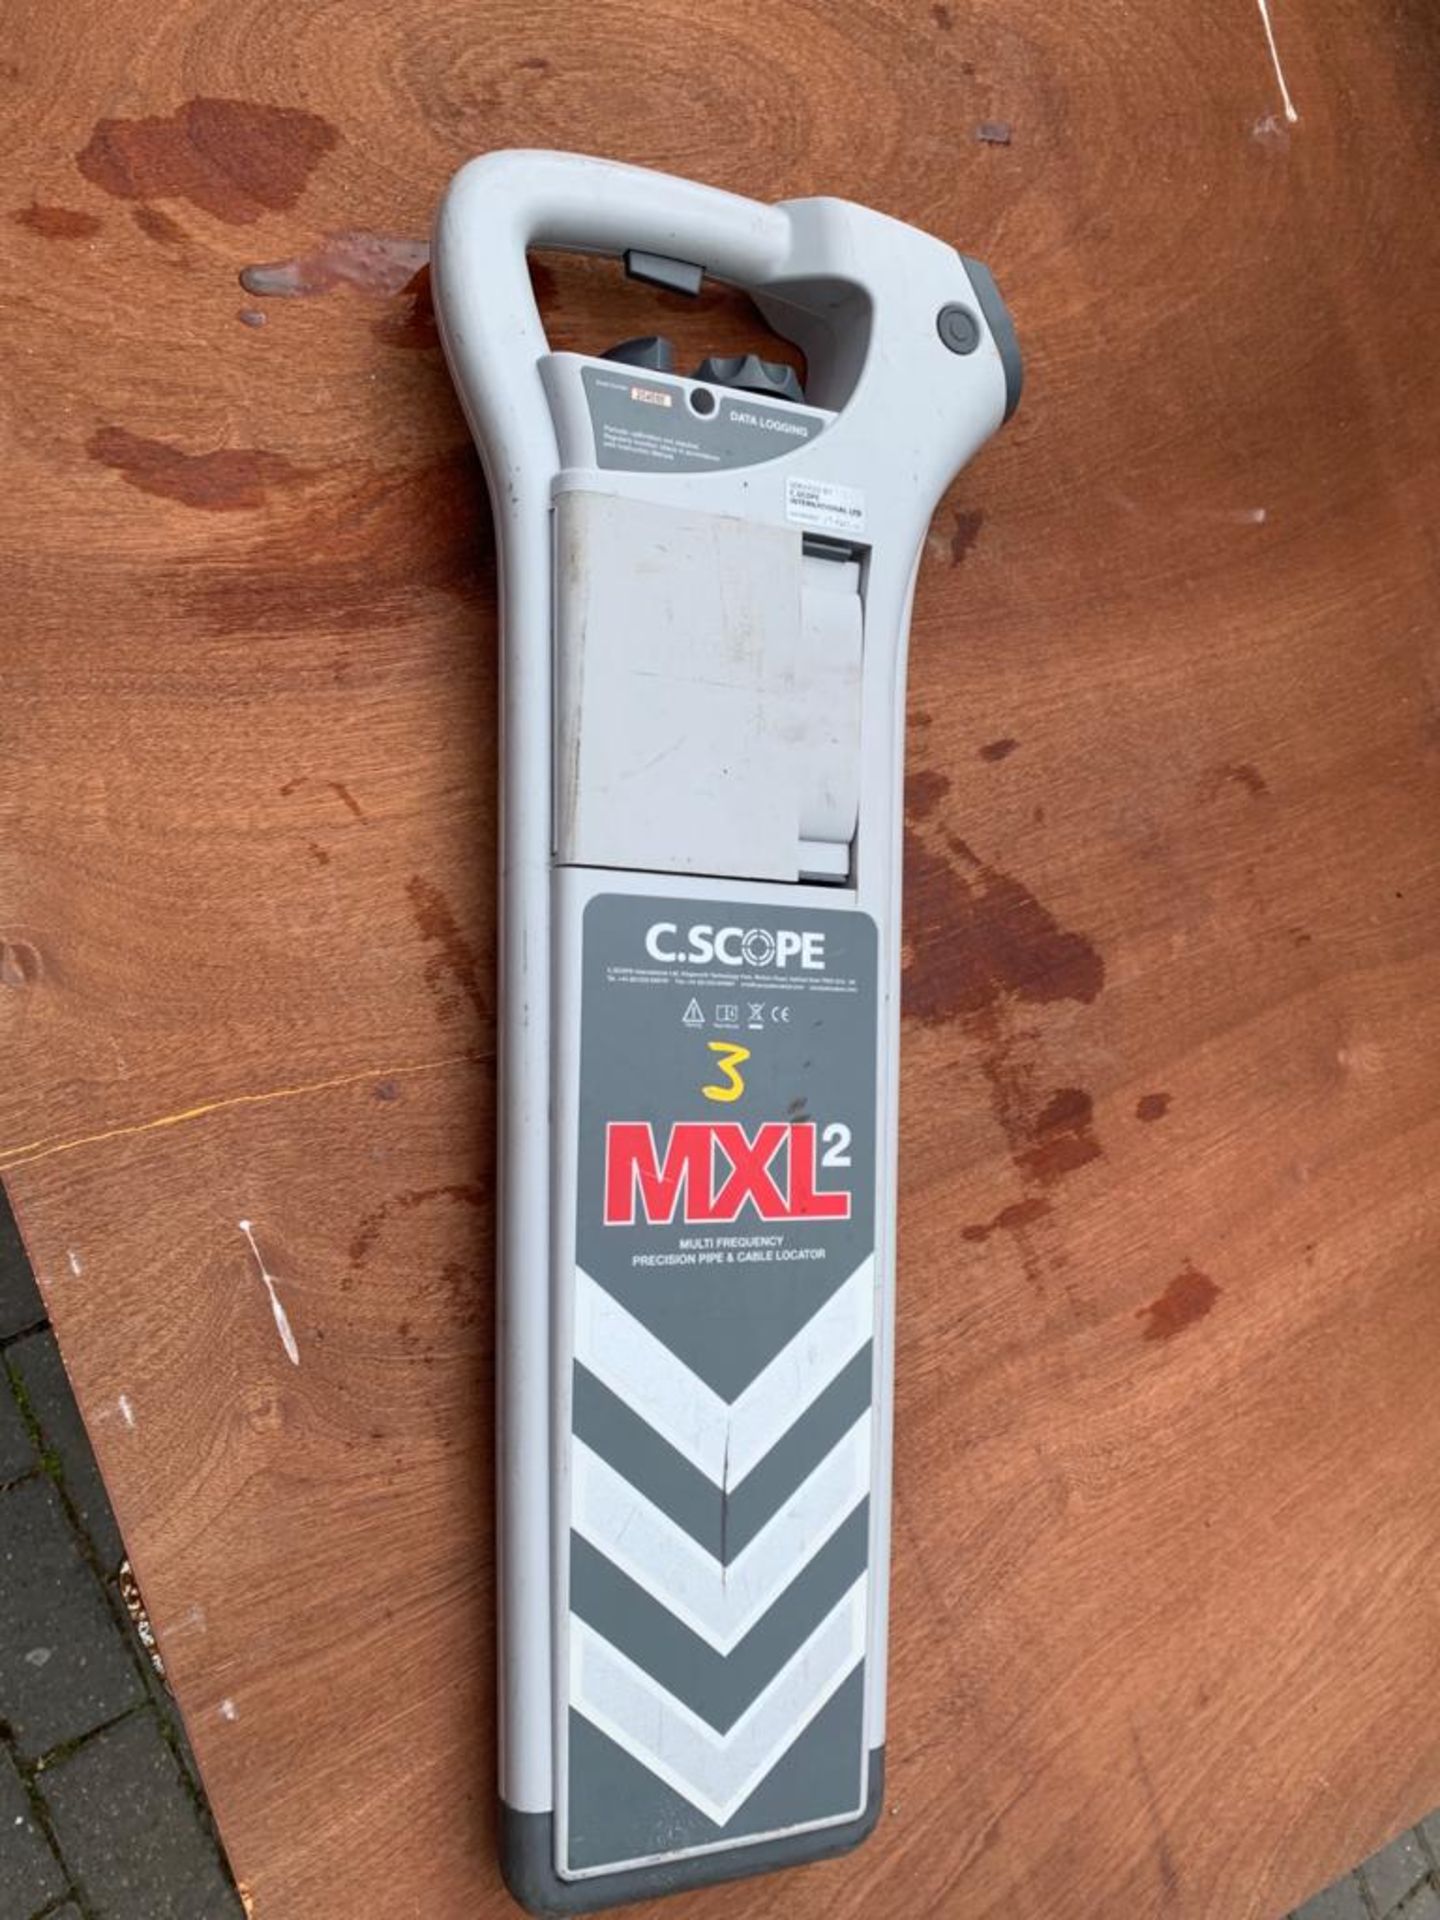 C.SCOPE MXL2 HIGH PERFORMANCE DIGITAL PRECISION PIPE & CABLE LOCATOR WITH 4 DETECTION MODES